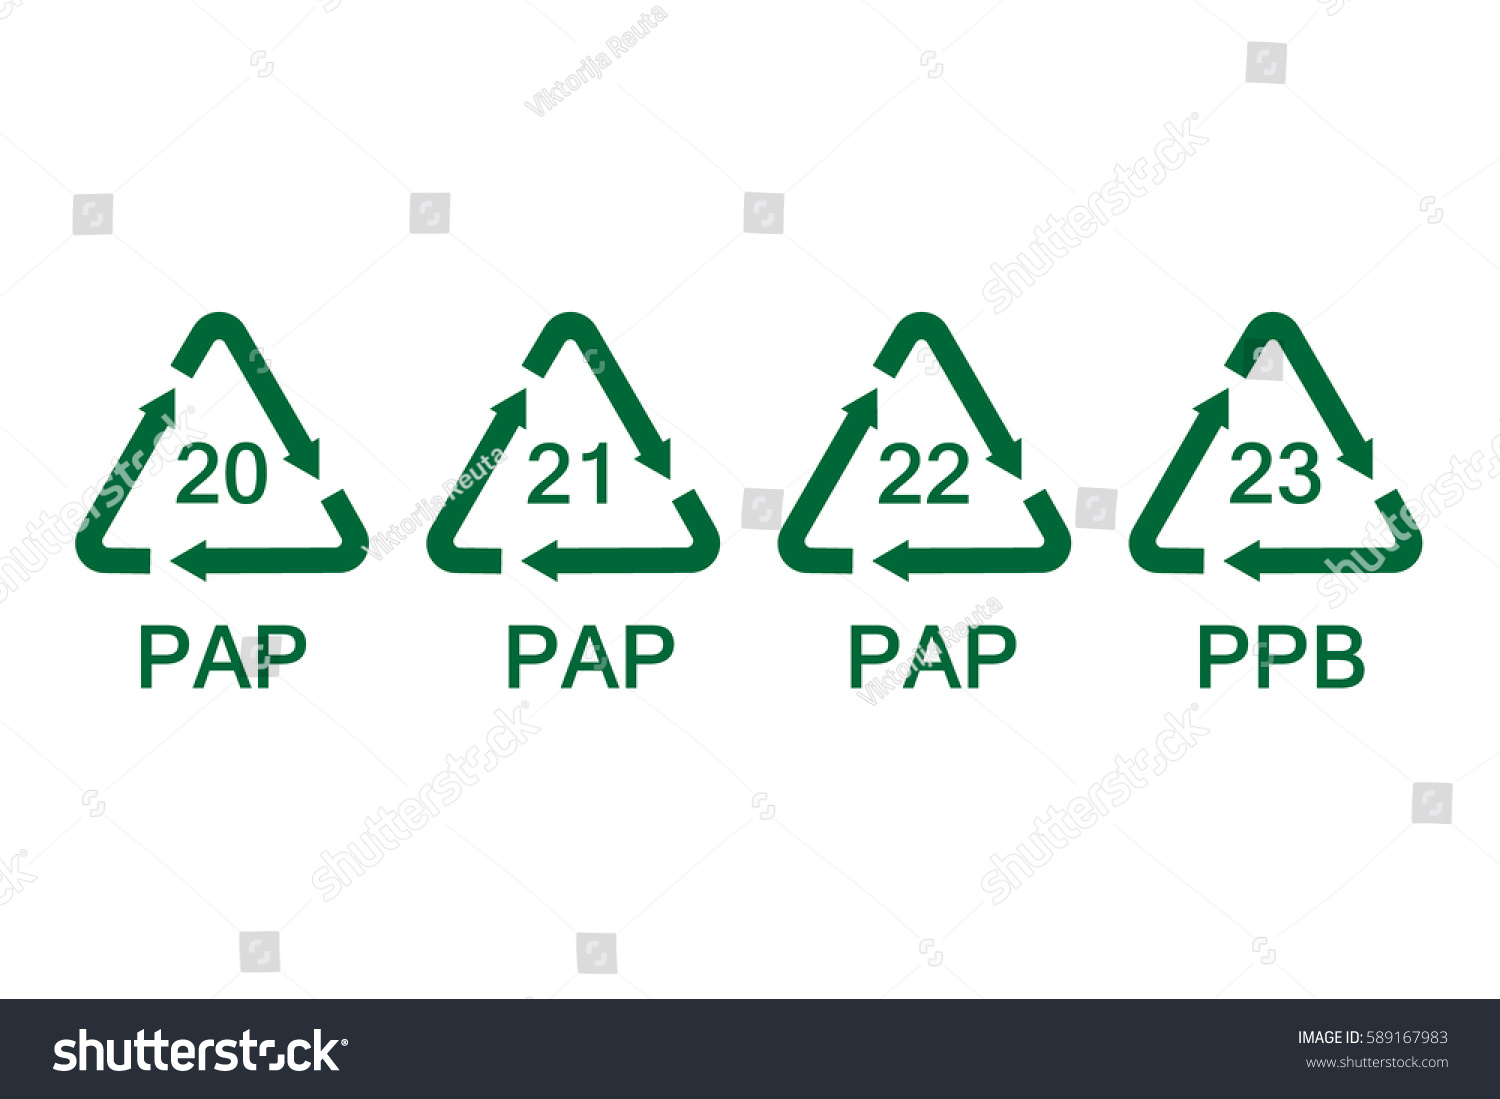 SVG of Vector illustration green paper recycle, recycling symbols, signs, codes icon set, collection isolated on white background. PAP  svg